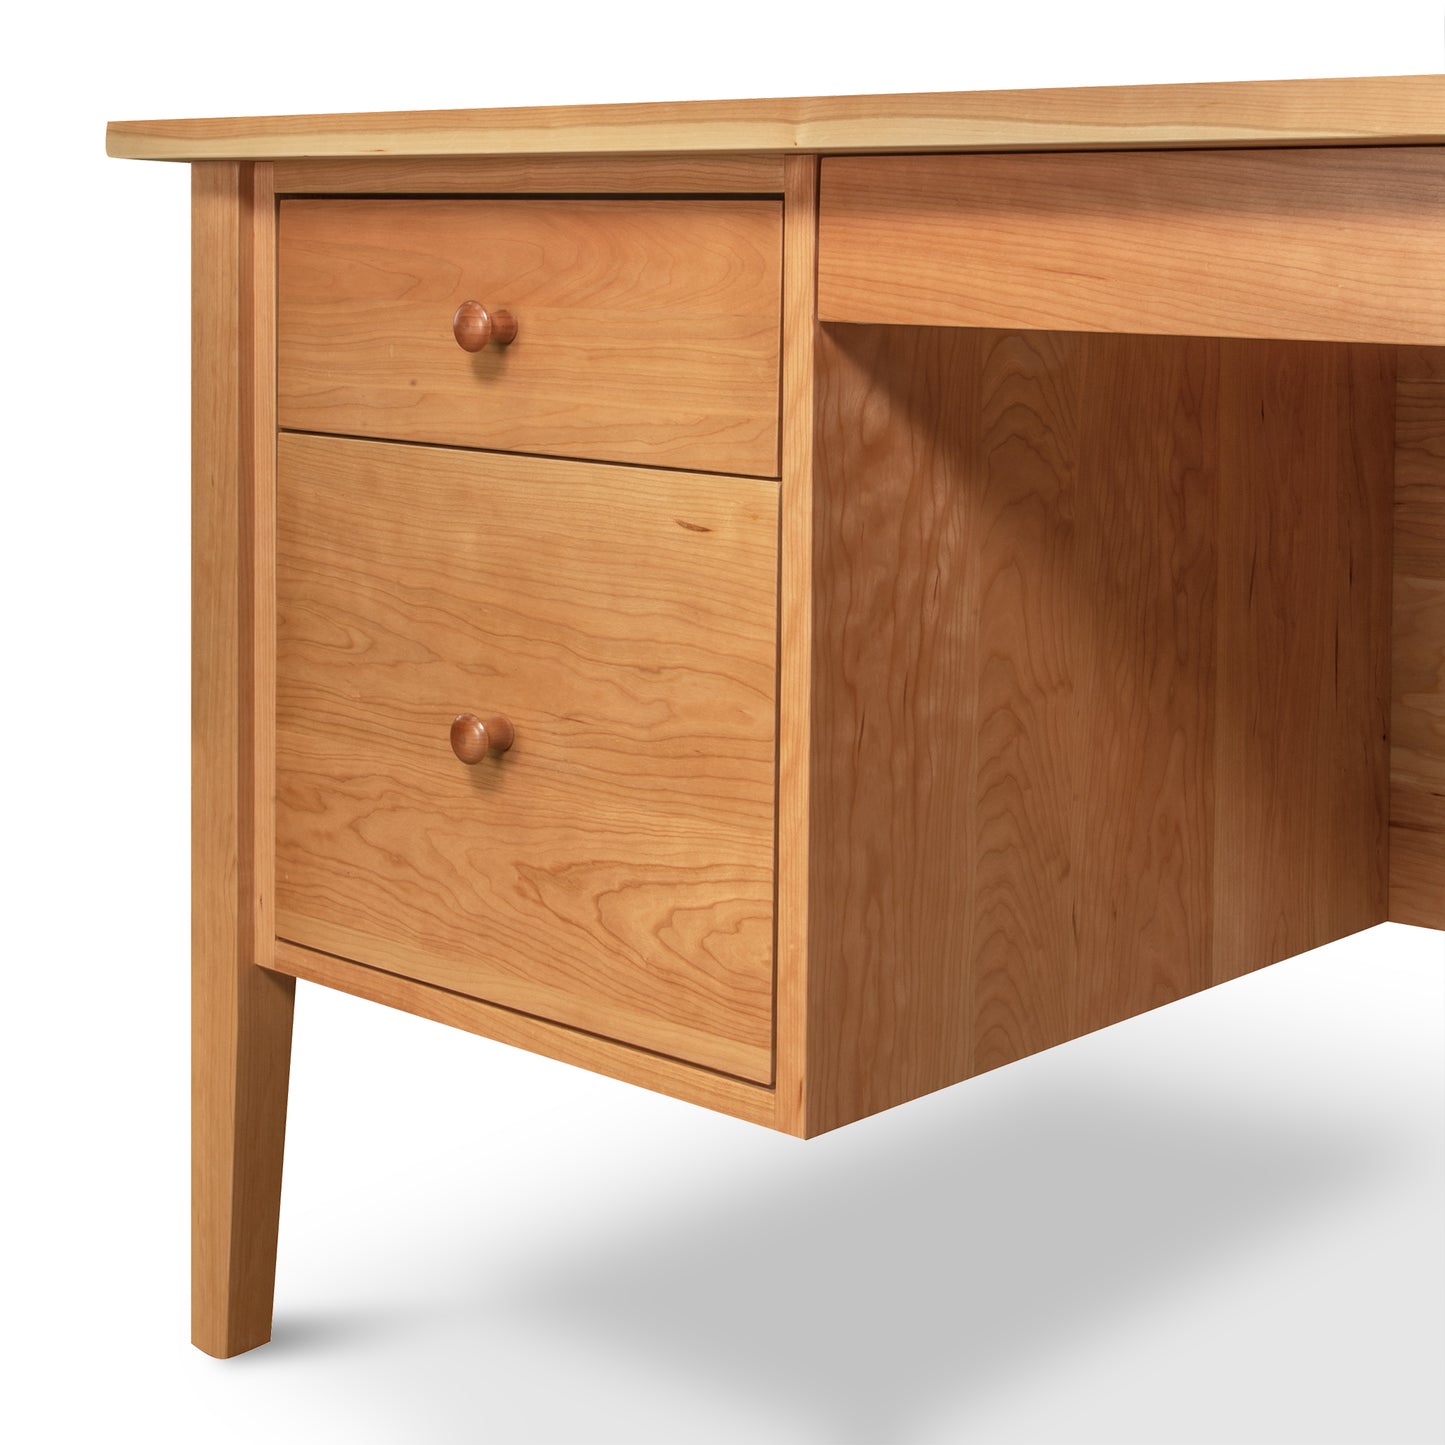 A wooden desk with two drawers and a drawer.